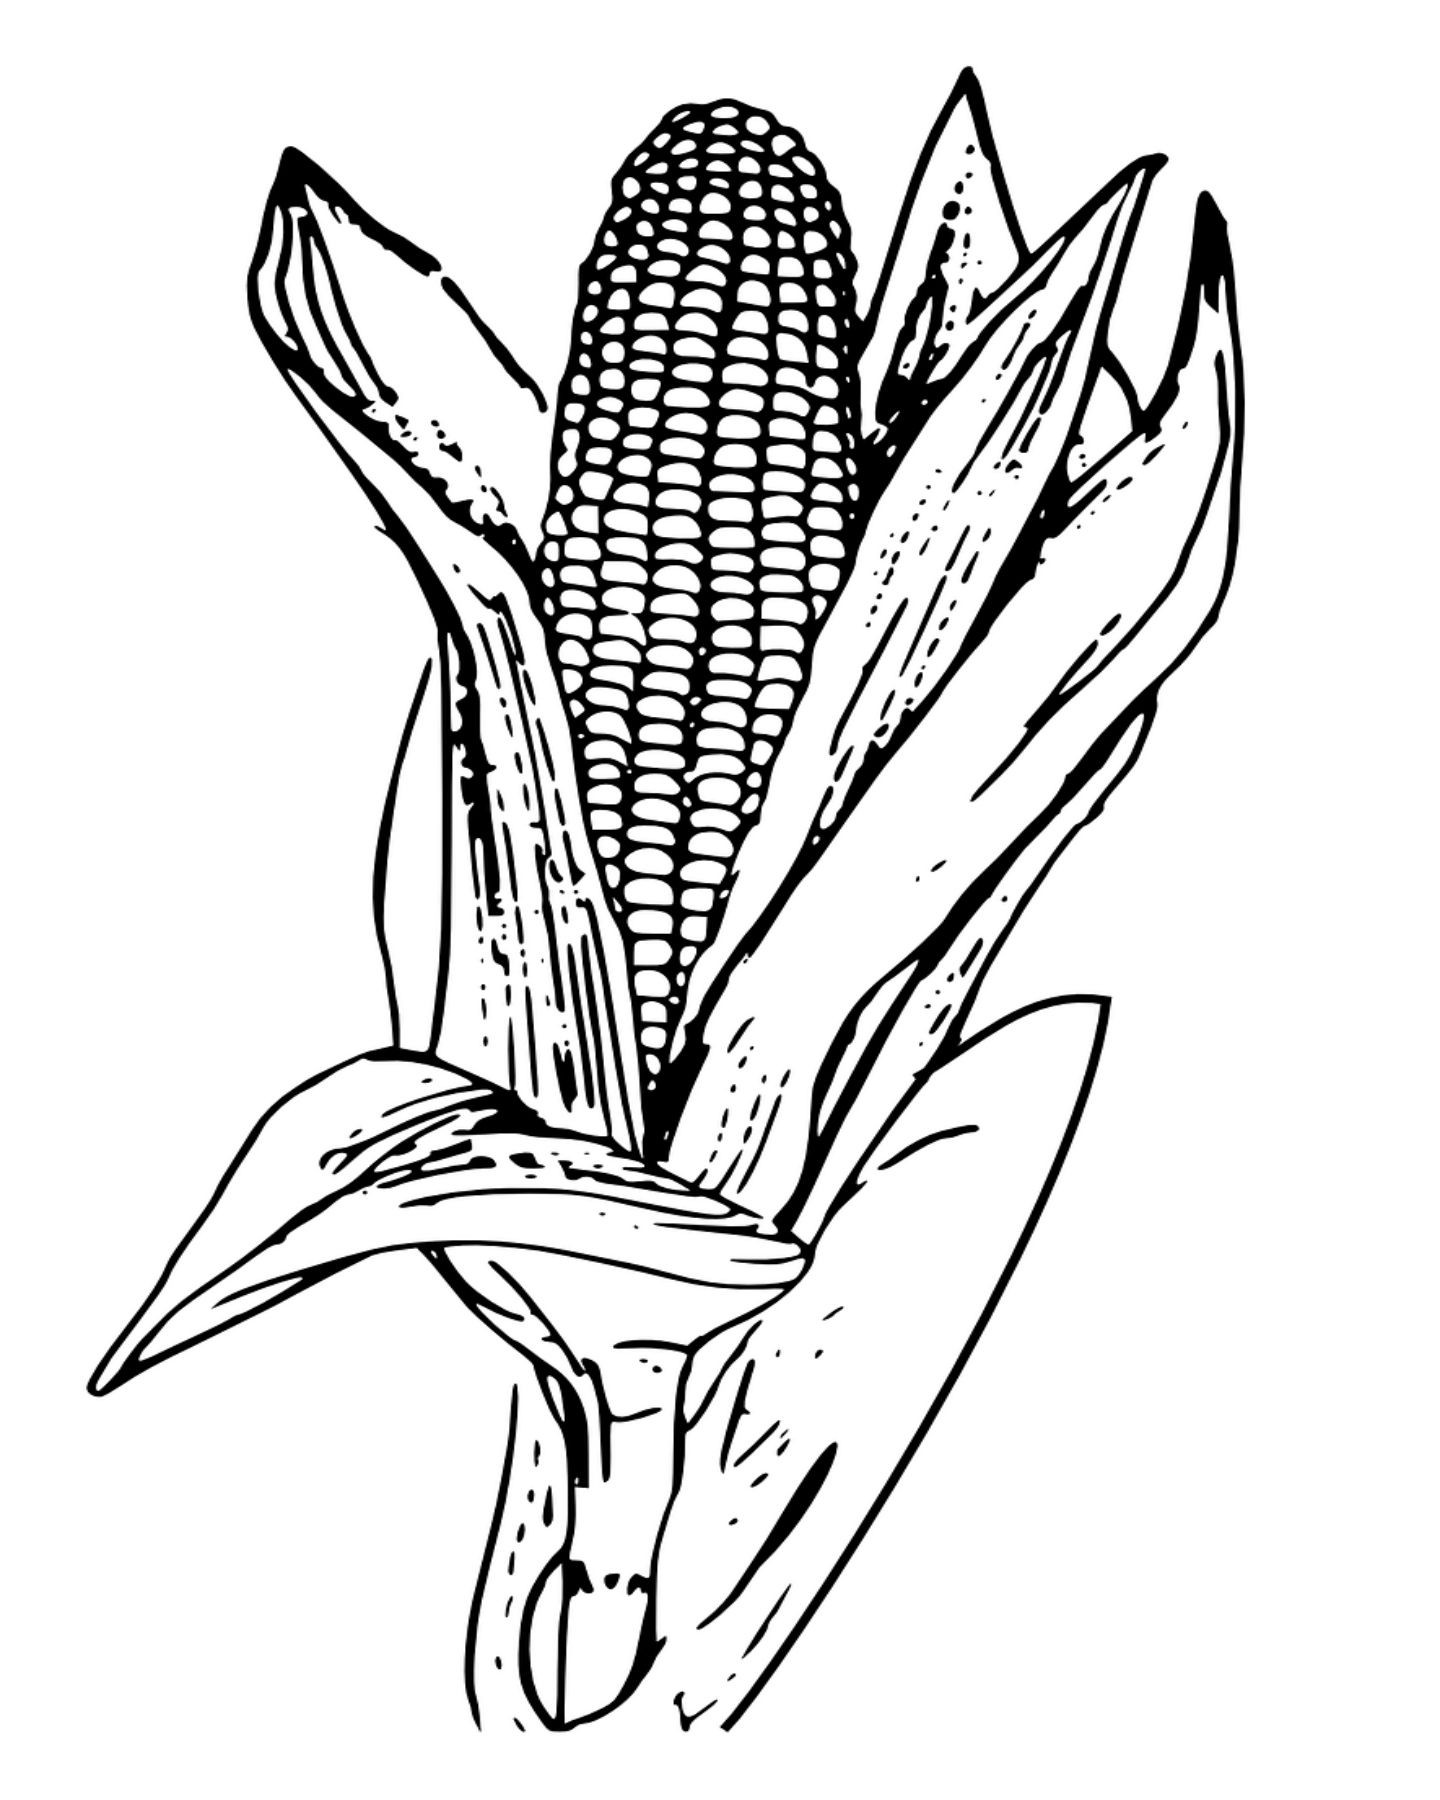 Corn On The Cob Coloring Page at GetColorings com Free printable